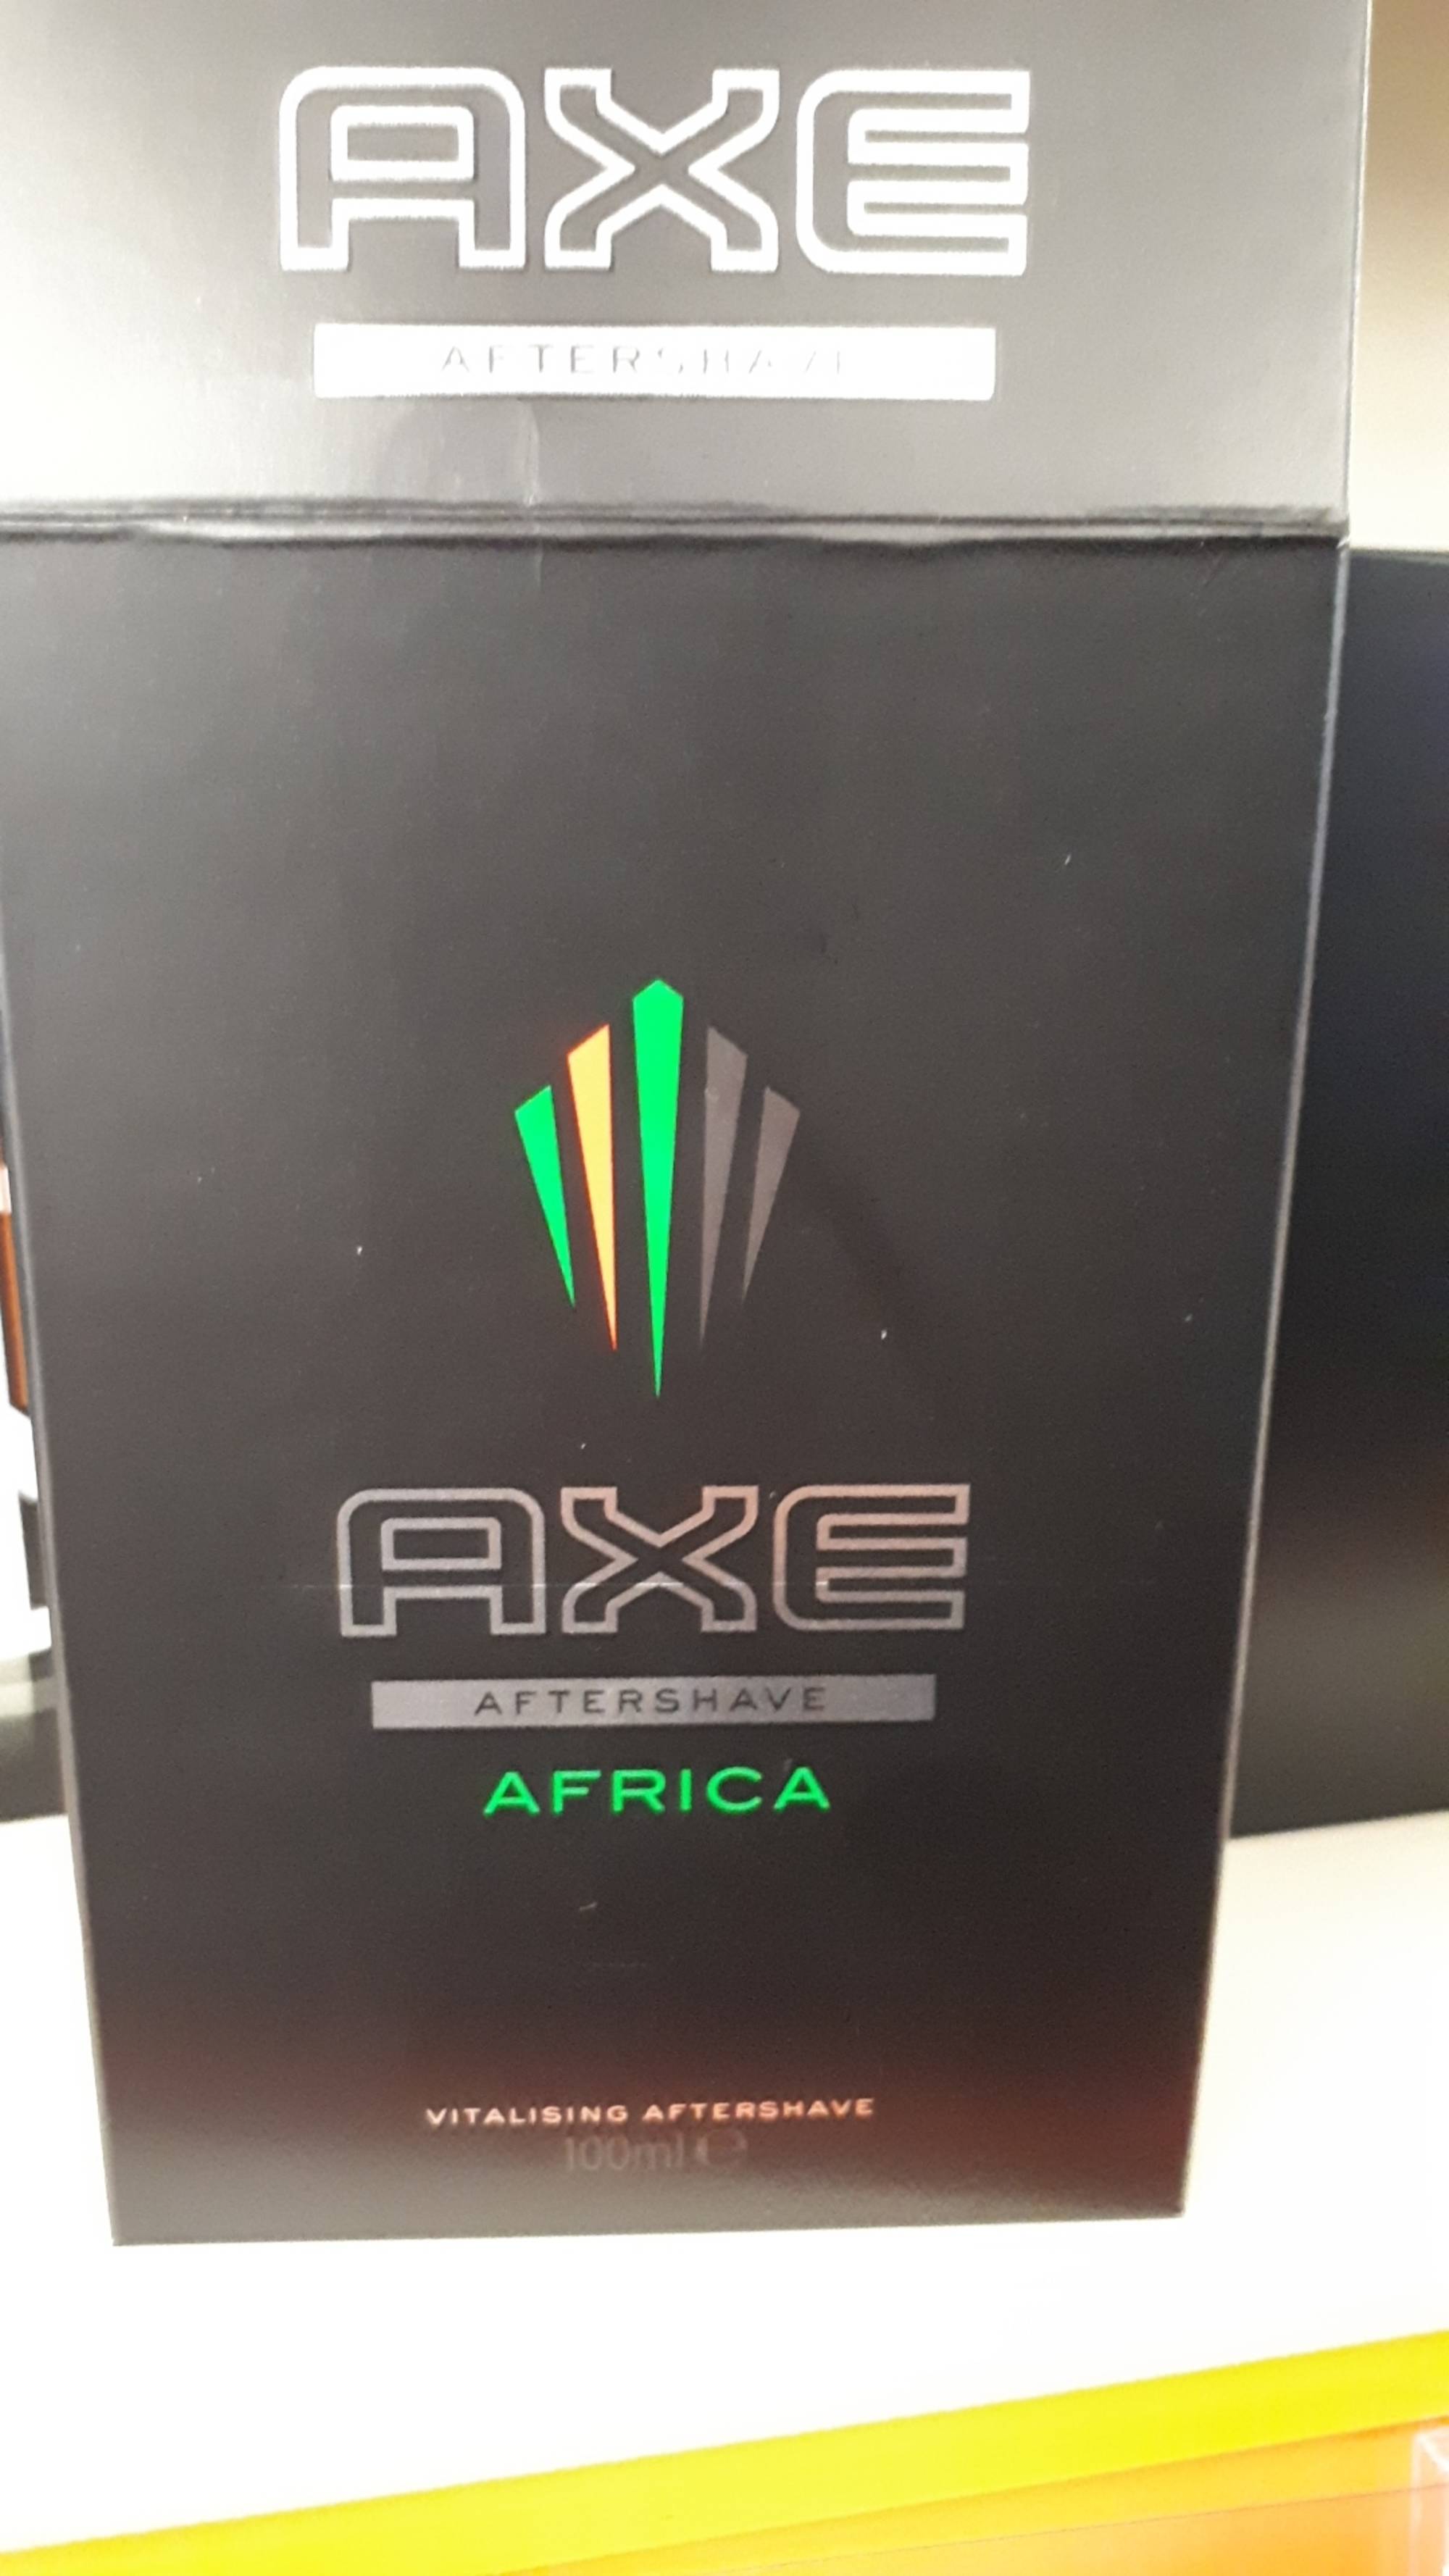 AXE - Africa - Vitalising aftershave